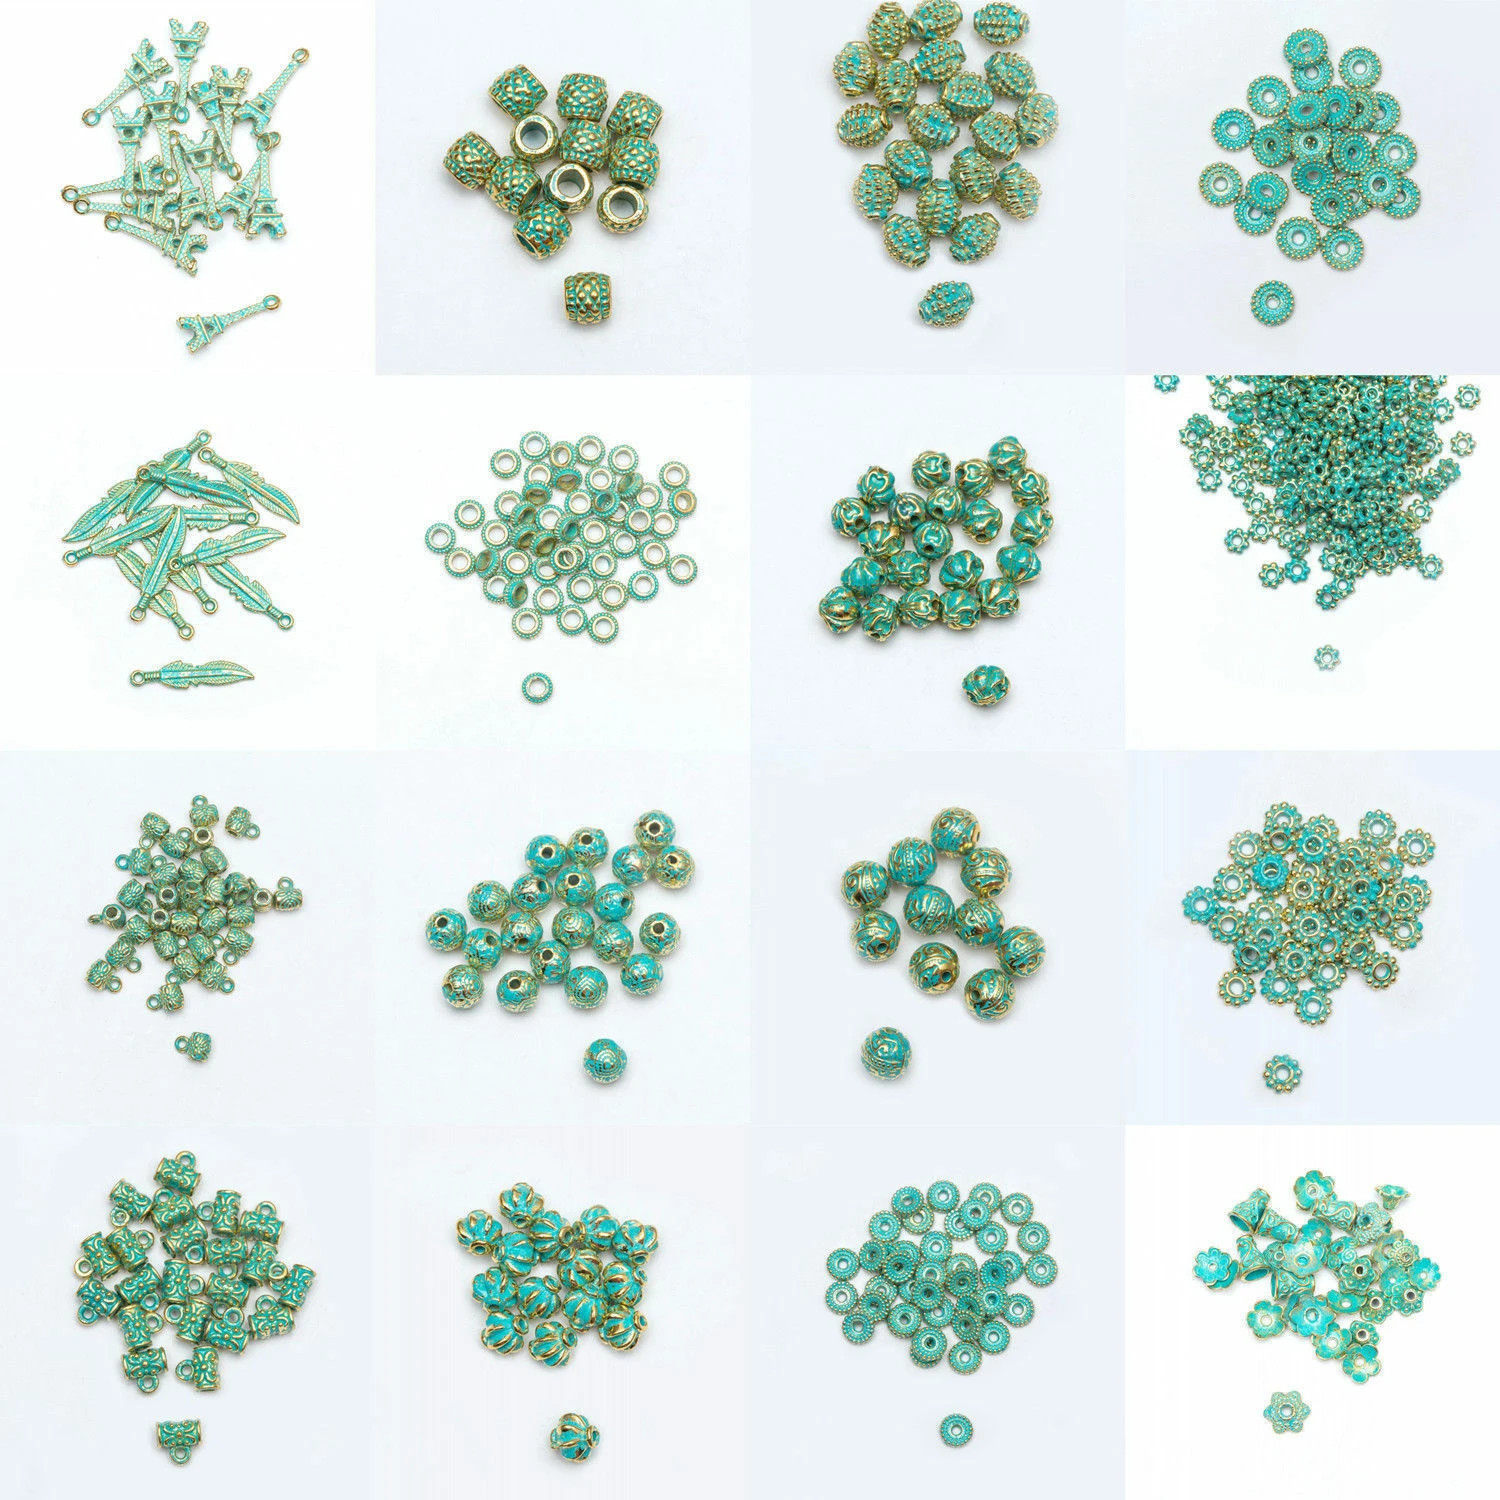 20-1000Pcs Retro Tibetan Silver Copper Green Gold Beads Spacer Bead Caps Charms For Jewelry Necklace Bracelet DIY Findings